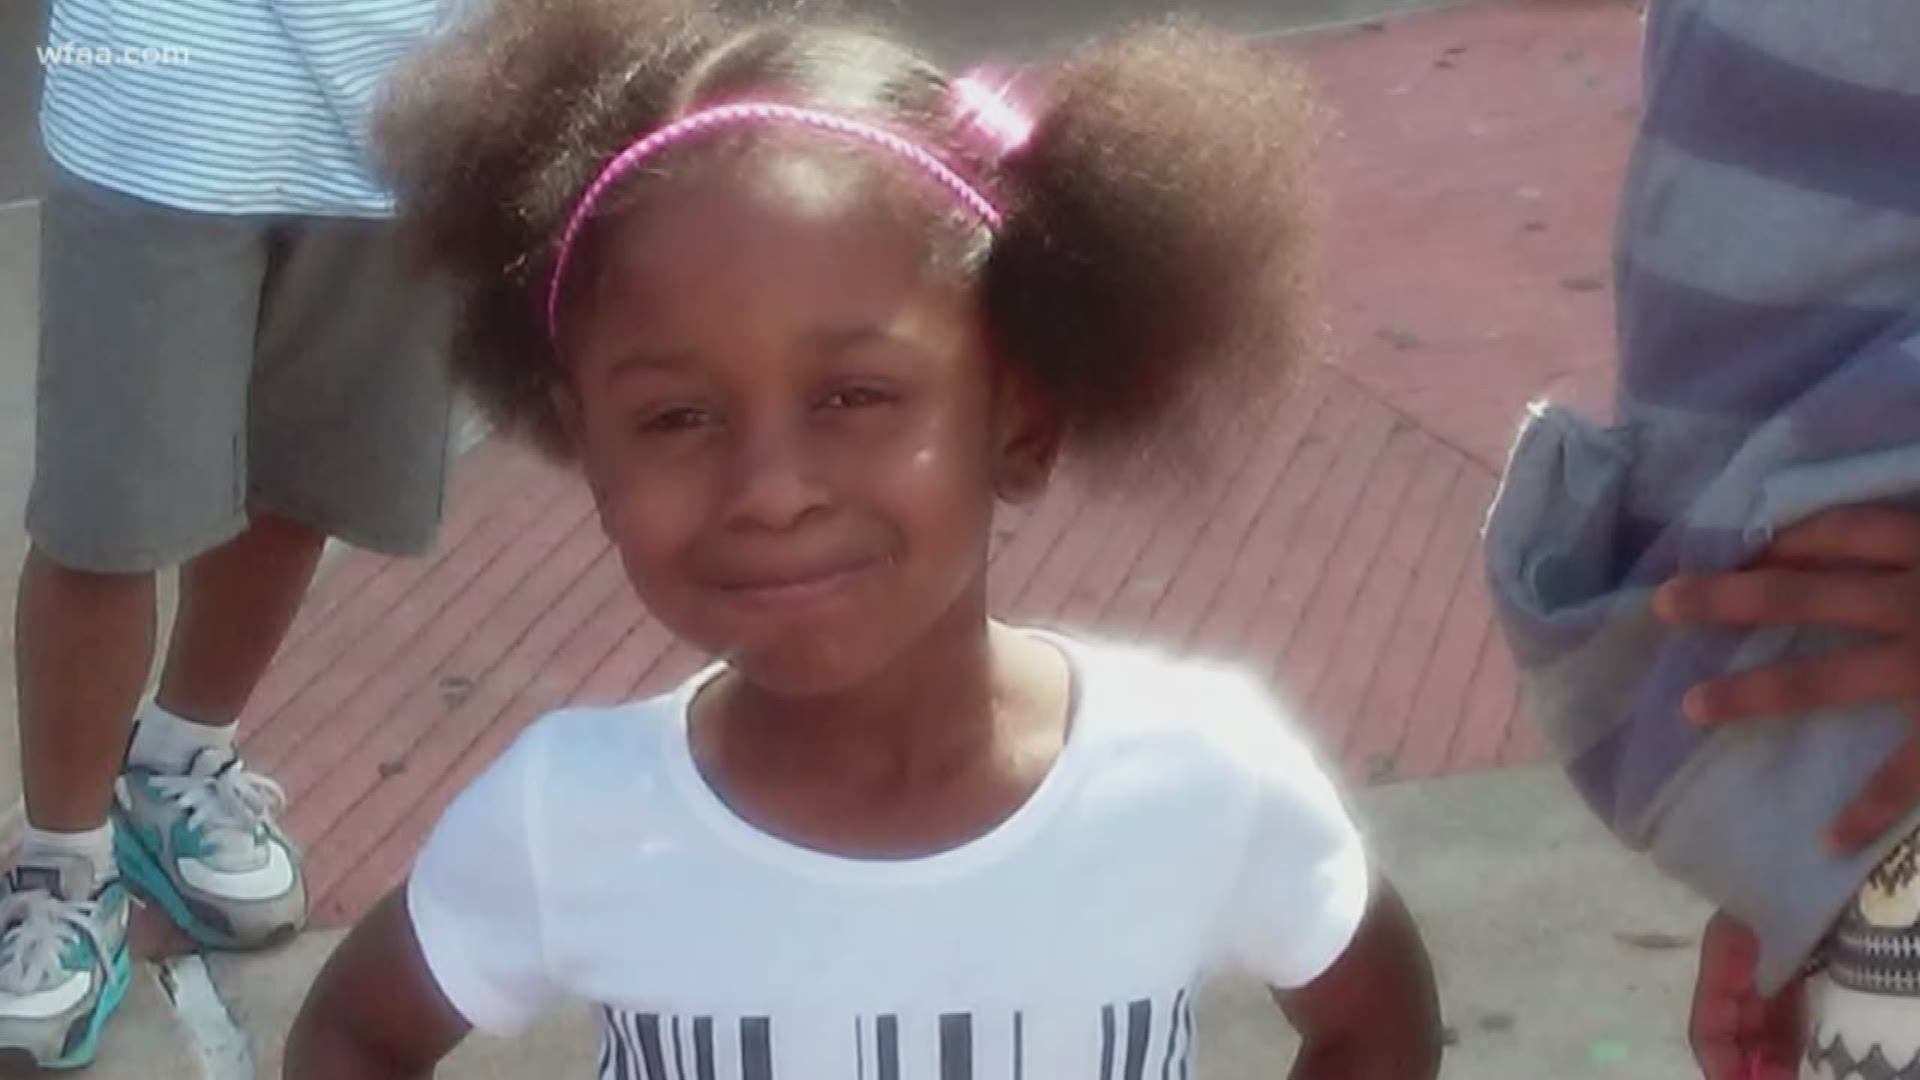 Police say 9-year-old Brandoniya Bennett is the third child or teen killed at the Roseland Townhomes since July 9. The girl died after she was caught in crossfire of a gang shooting Wednesday. Now residents are questioning the safety of the complex.